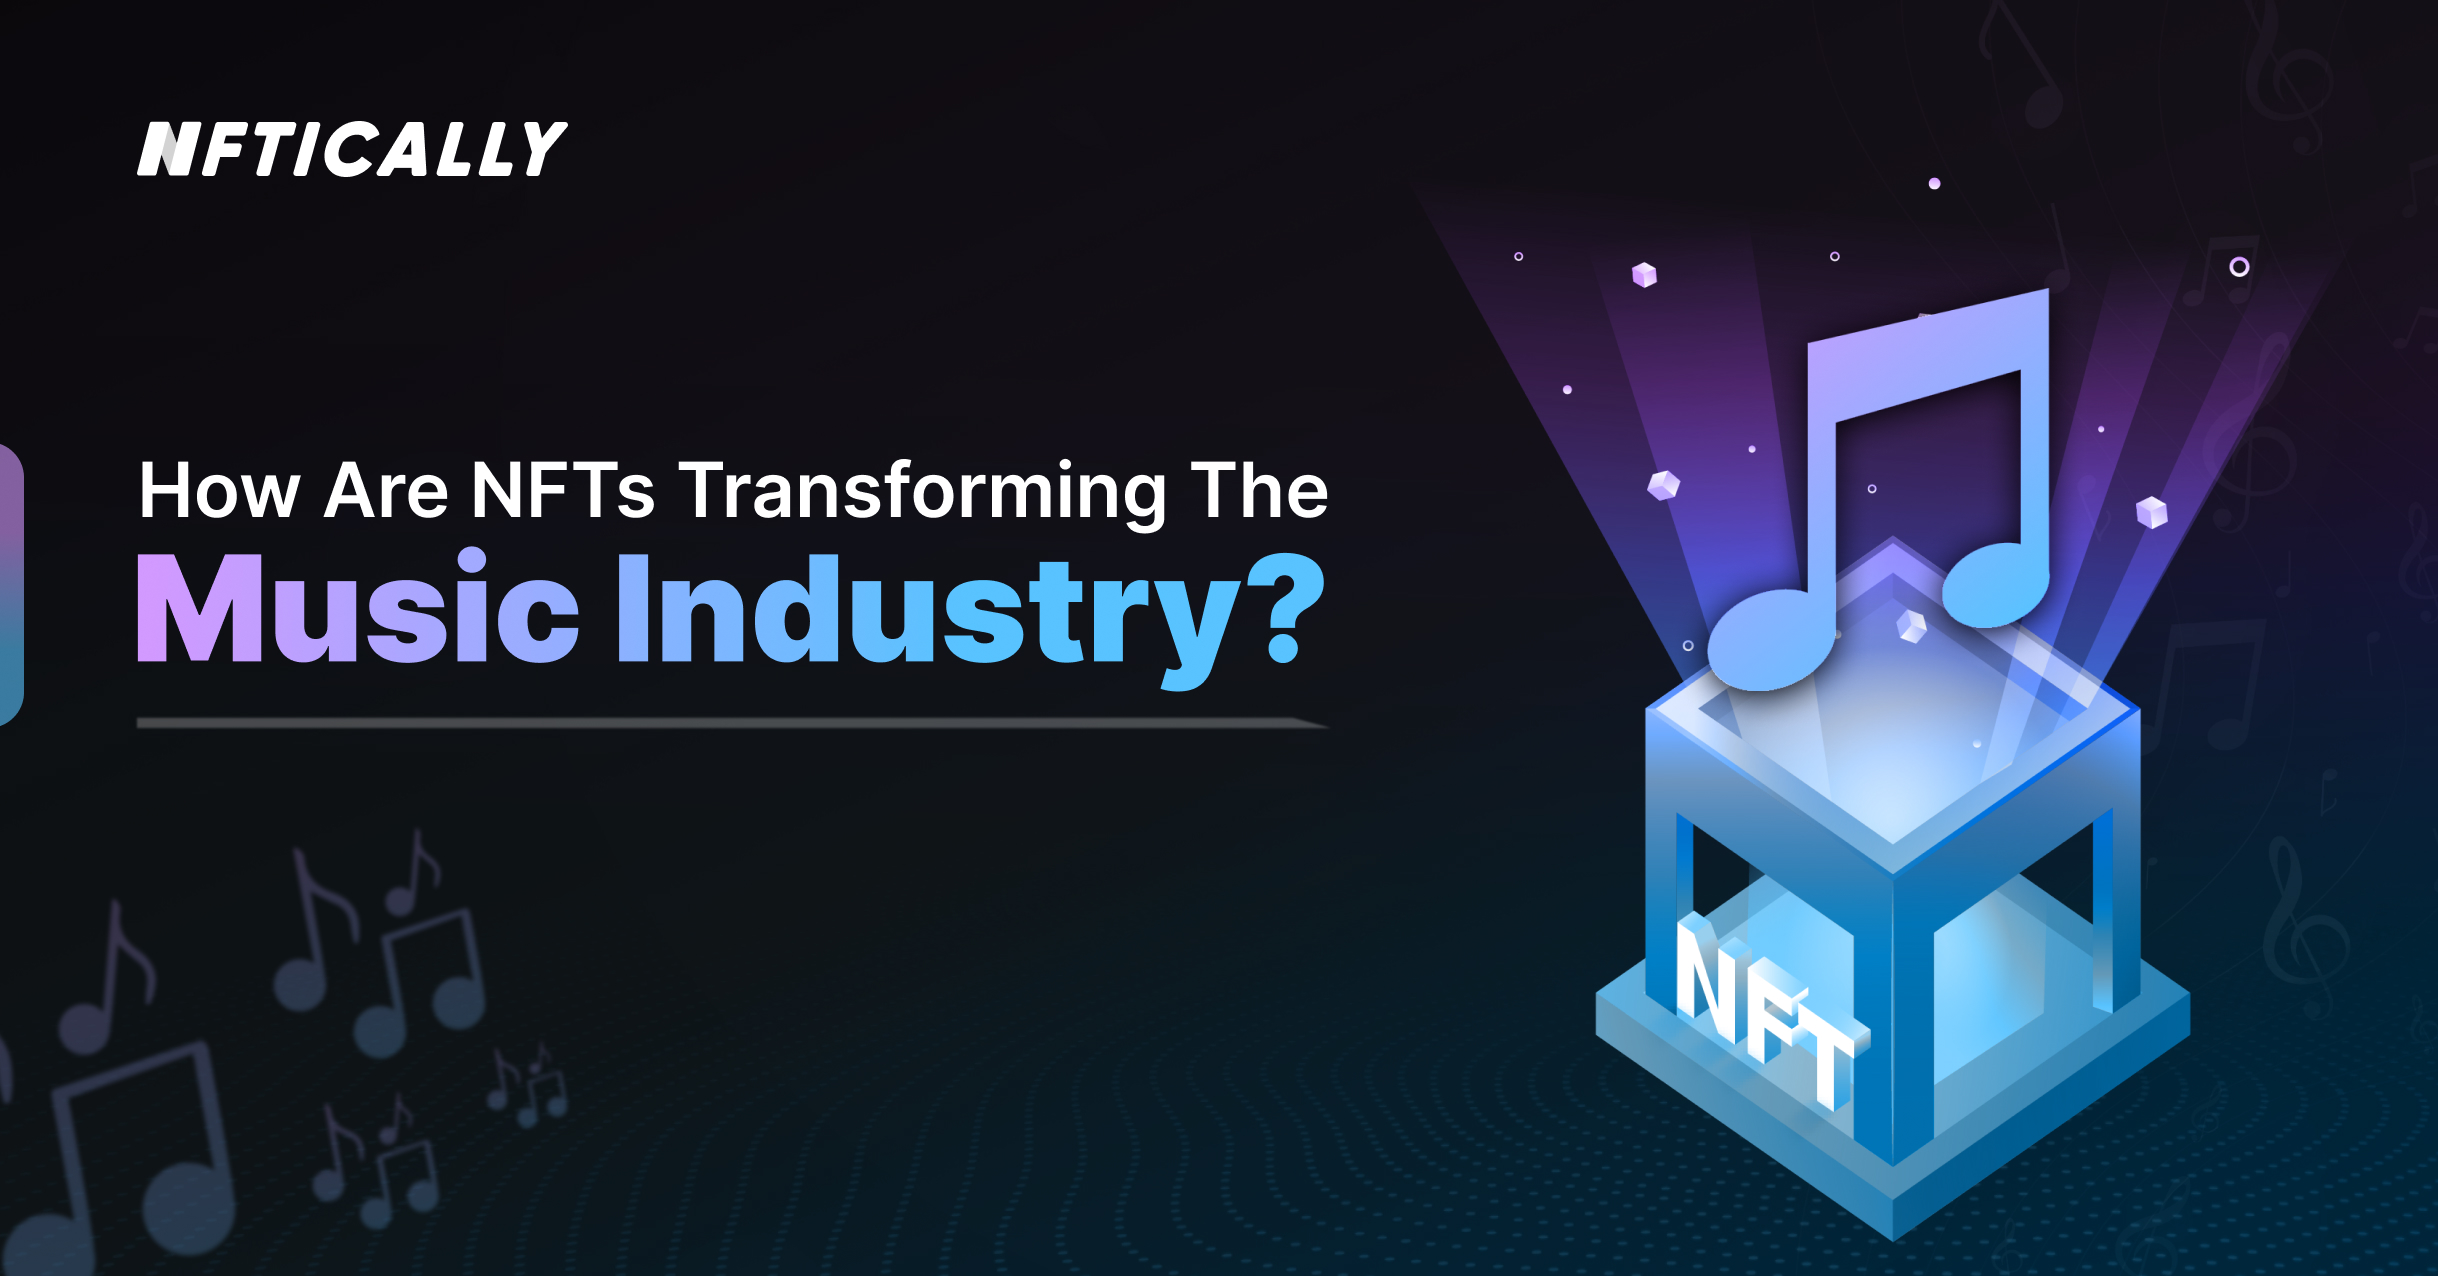 How Are NFTs Transforming the Music Industry?